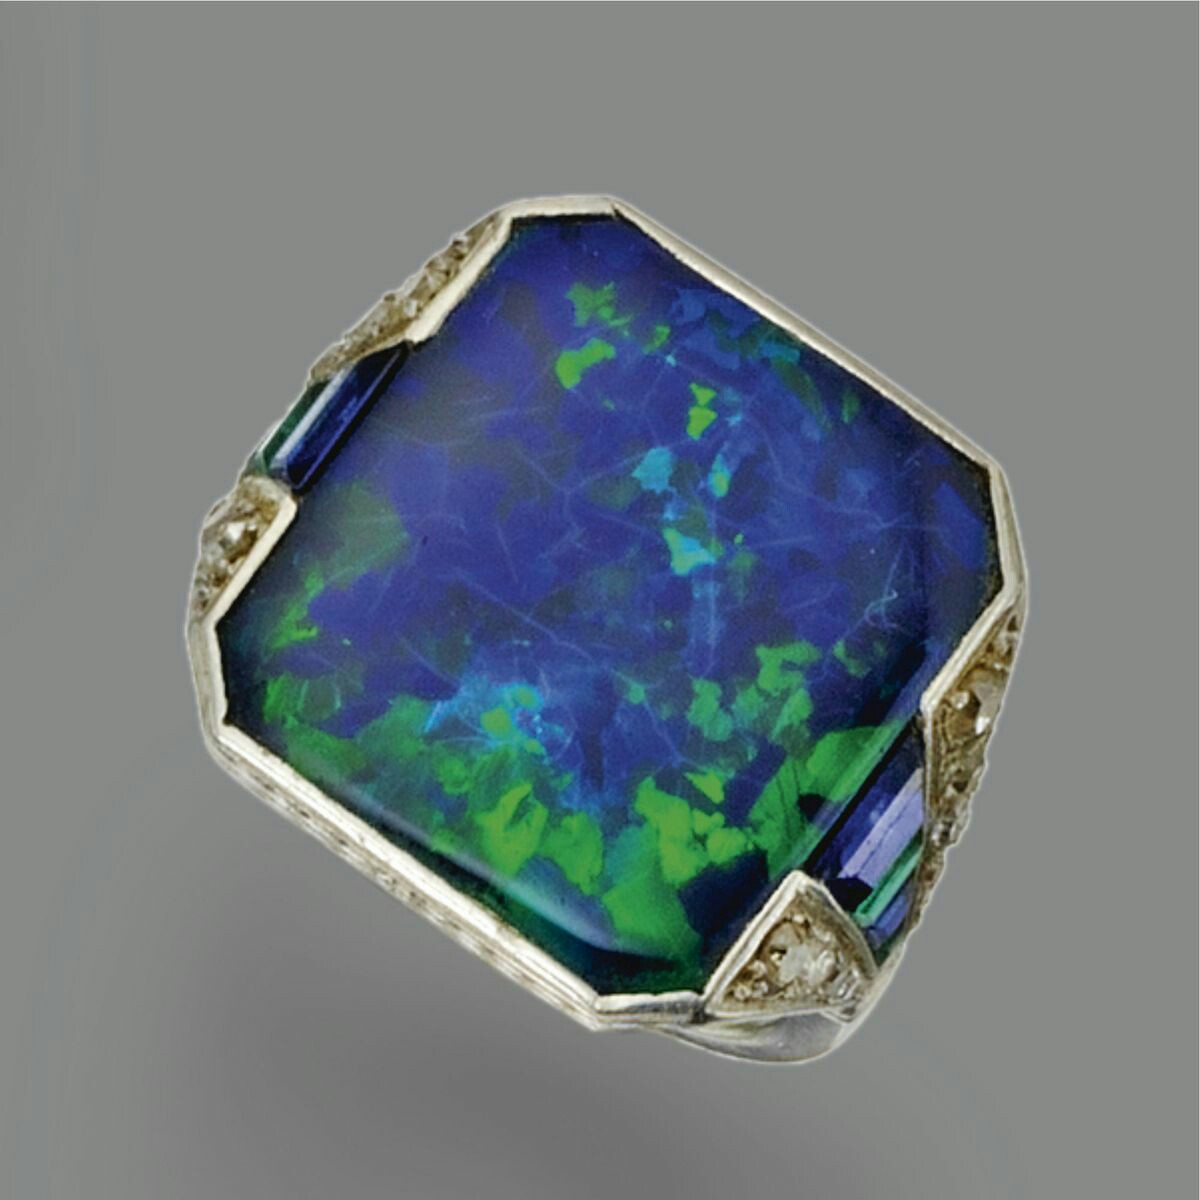 Black opal, colored stone and diamond ring, circa 1930 The black opal of rectangular shape with cut-corner edges measuring approximately 16.5 by 15.0 mm., the shoulders set with tapering bands of calibré-cut emeralds alternating with calibré-cut sapphires within borders of small single-cut diamonds, mounted in platinum, size 5.